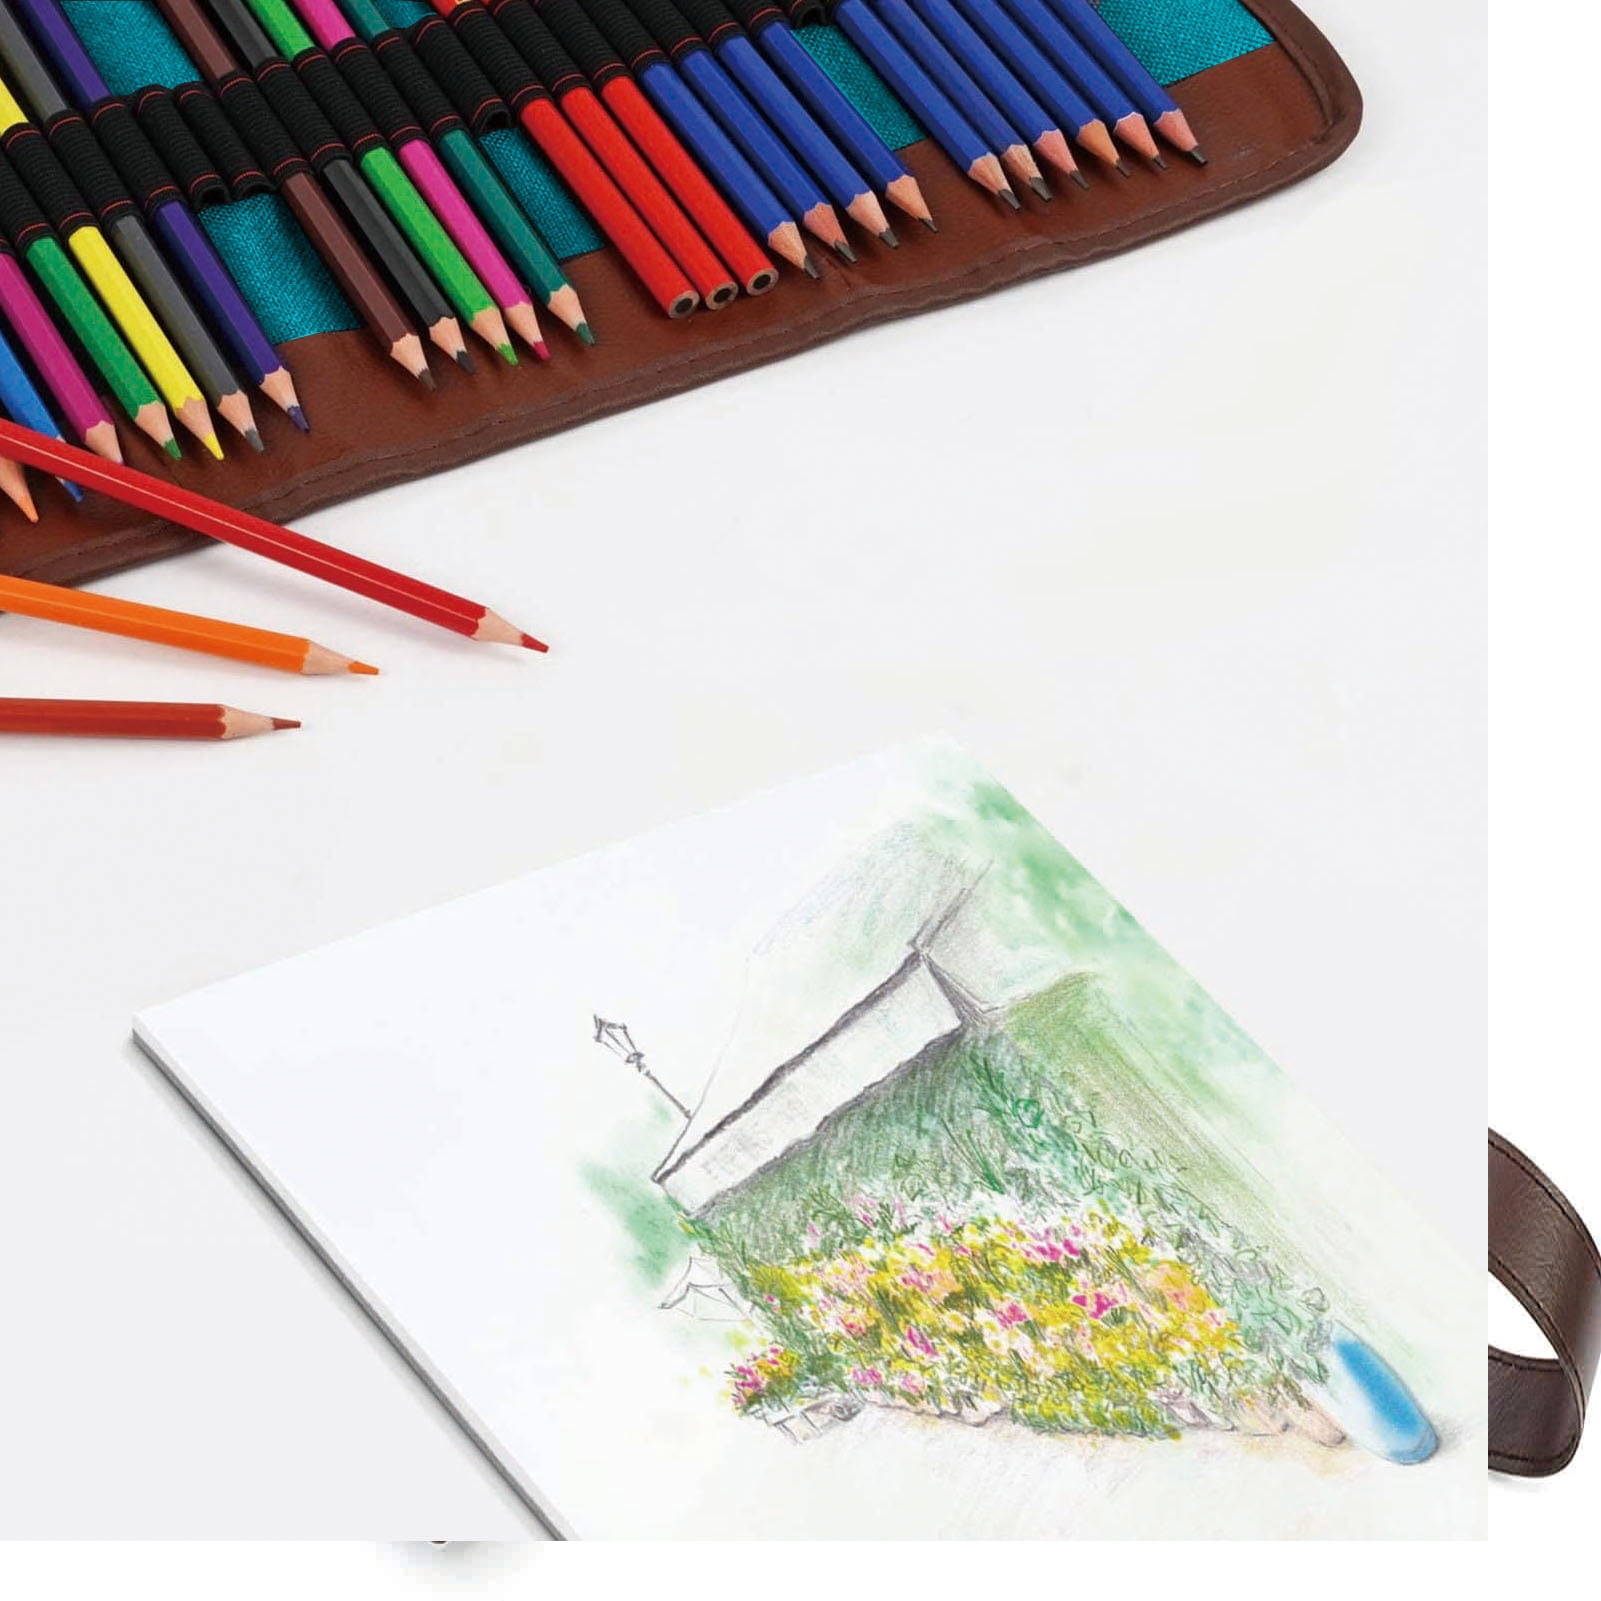 The Top 5 Inexpensive Colored Pencils for the Non-Artist – Samantha B Design